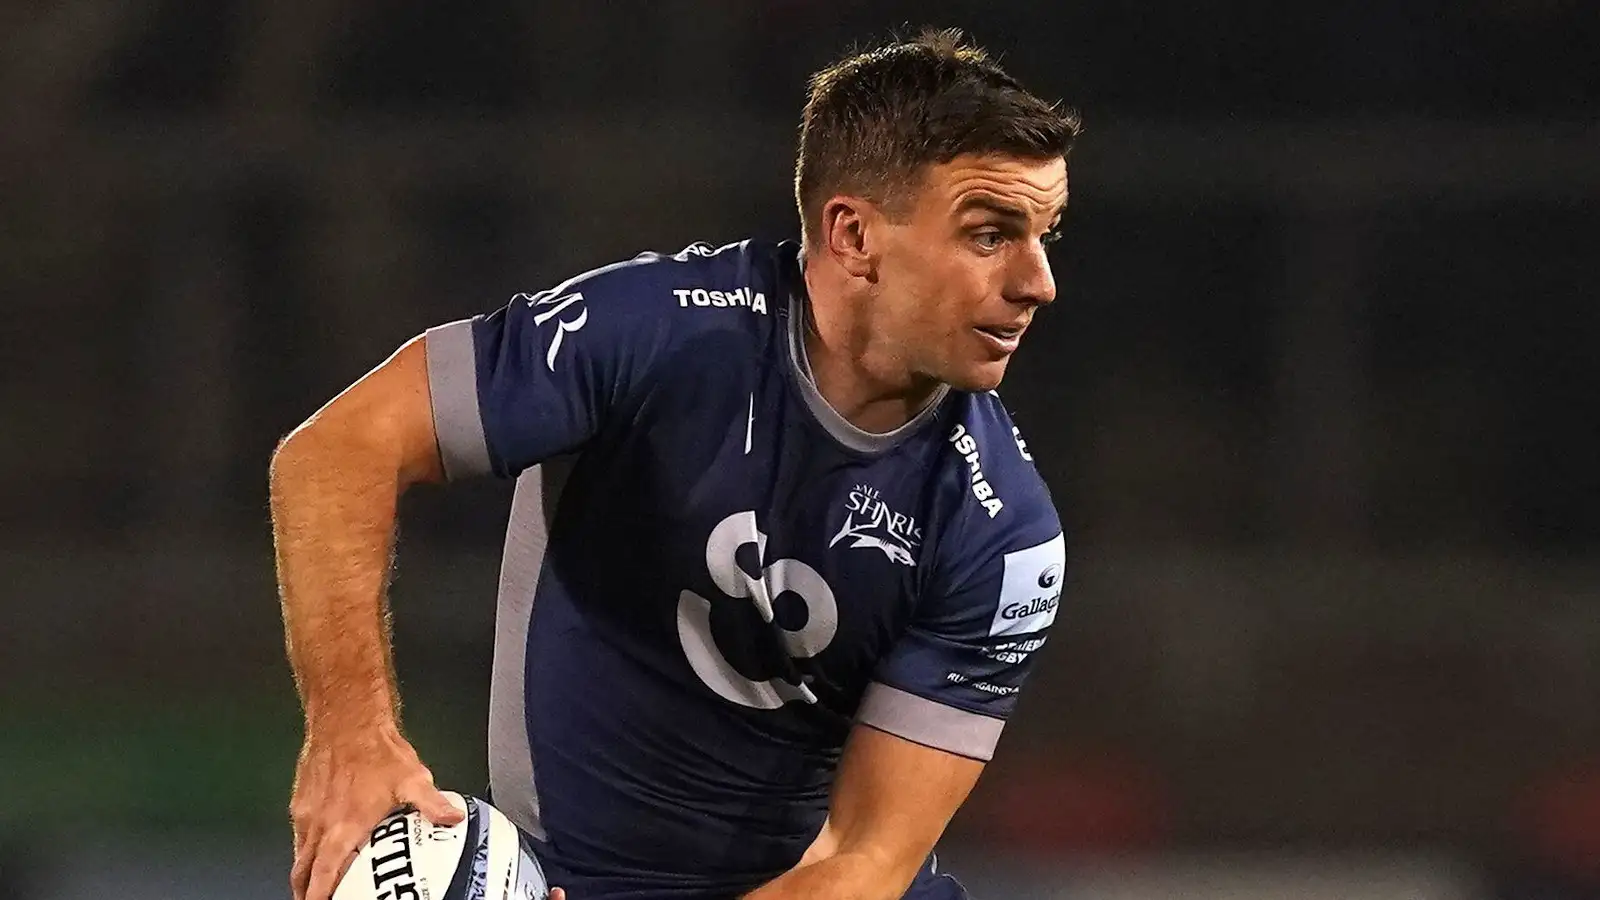 George Ford in action for Sale Sharks.